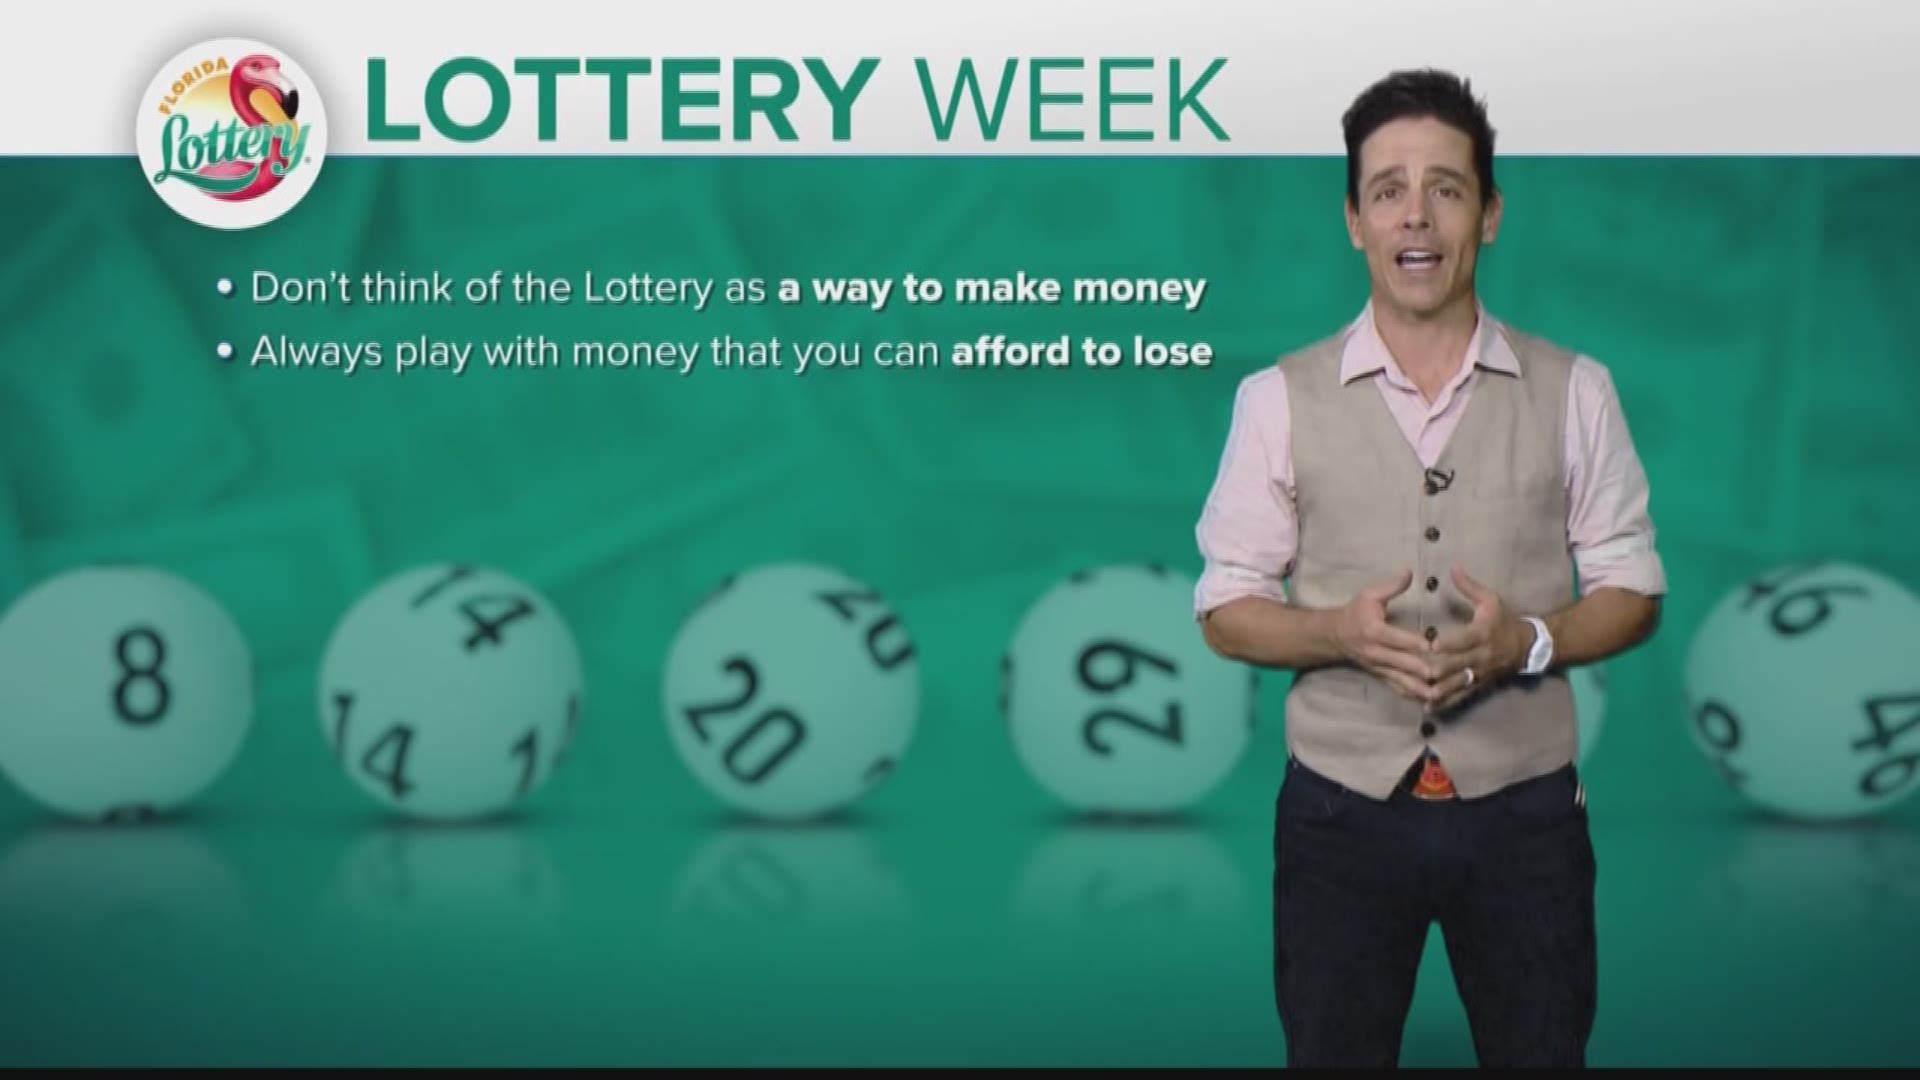 Celebrate National Lottery Week responsibly with these key reminders.